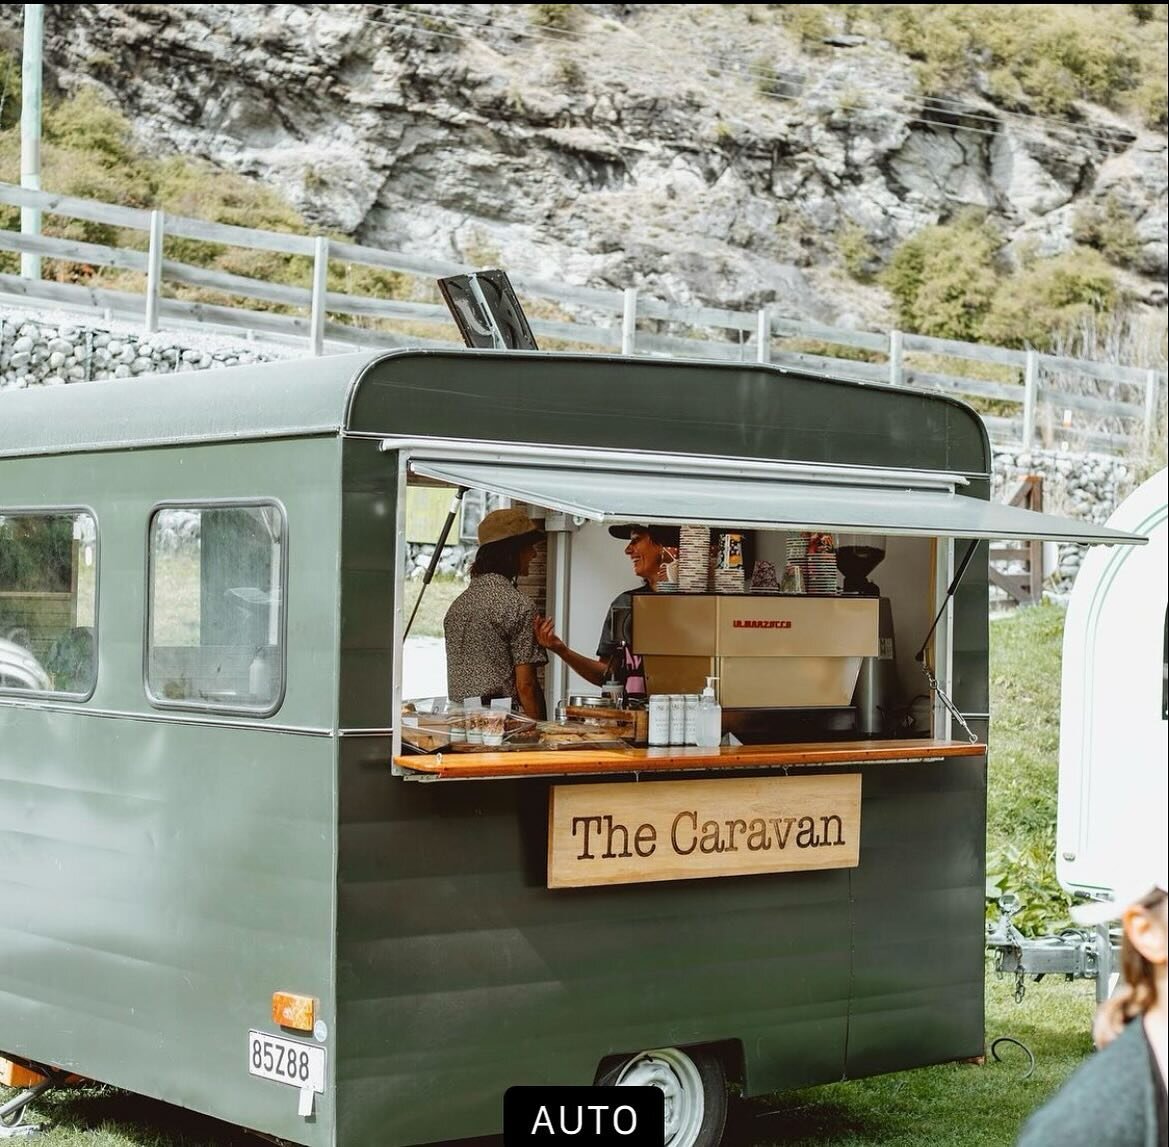 Did you know that Bespoke kitchen has a mobile coffee caravan. Tiny and cute,we can tuck into most spaces. Serving the finest Allpress coffee and Bespoke treats. Available for private events,sports events, weddings, you name it, we can do it!